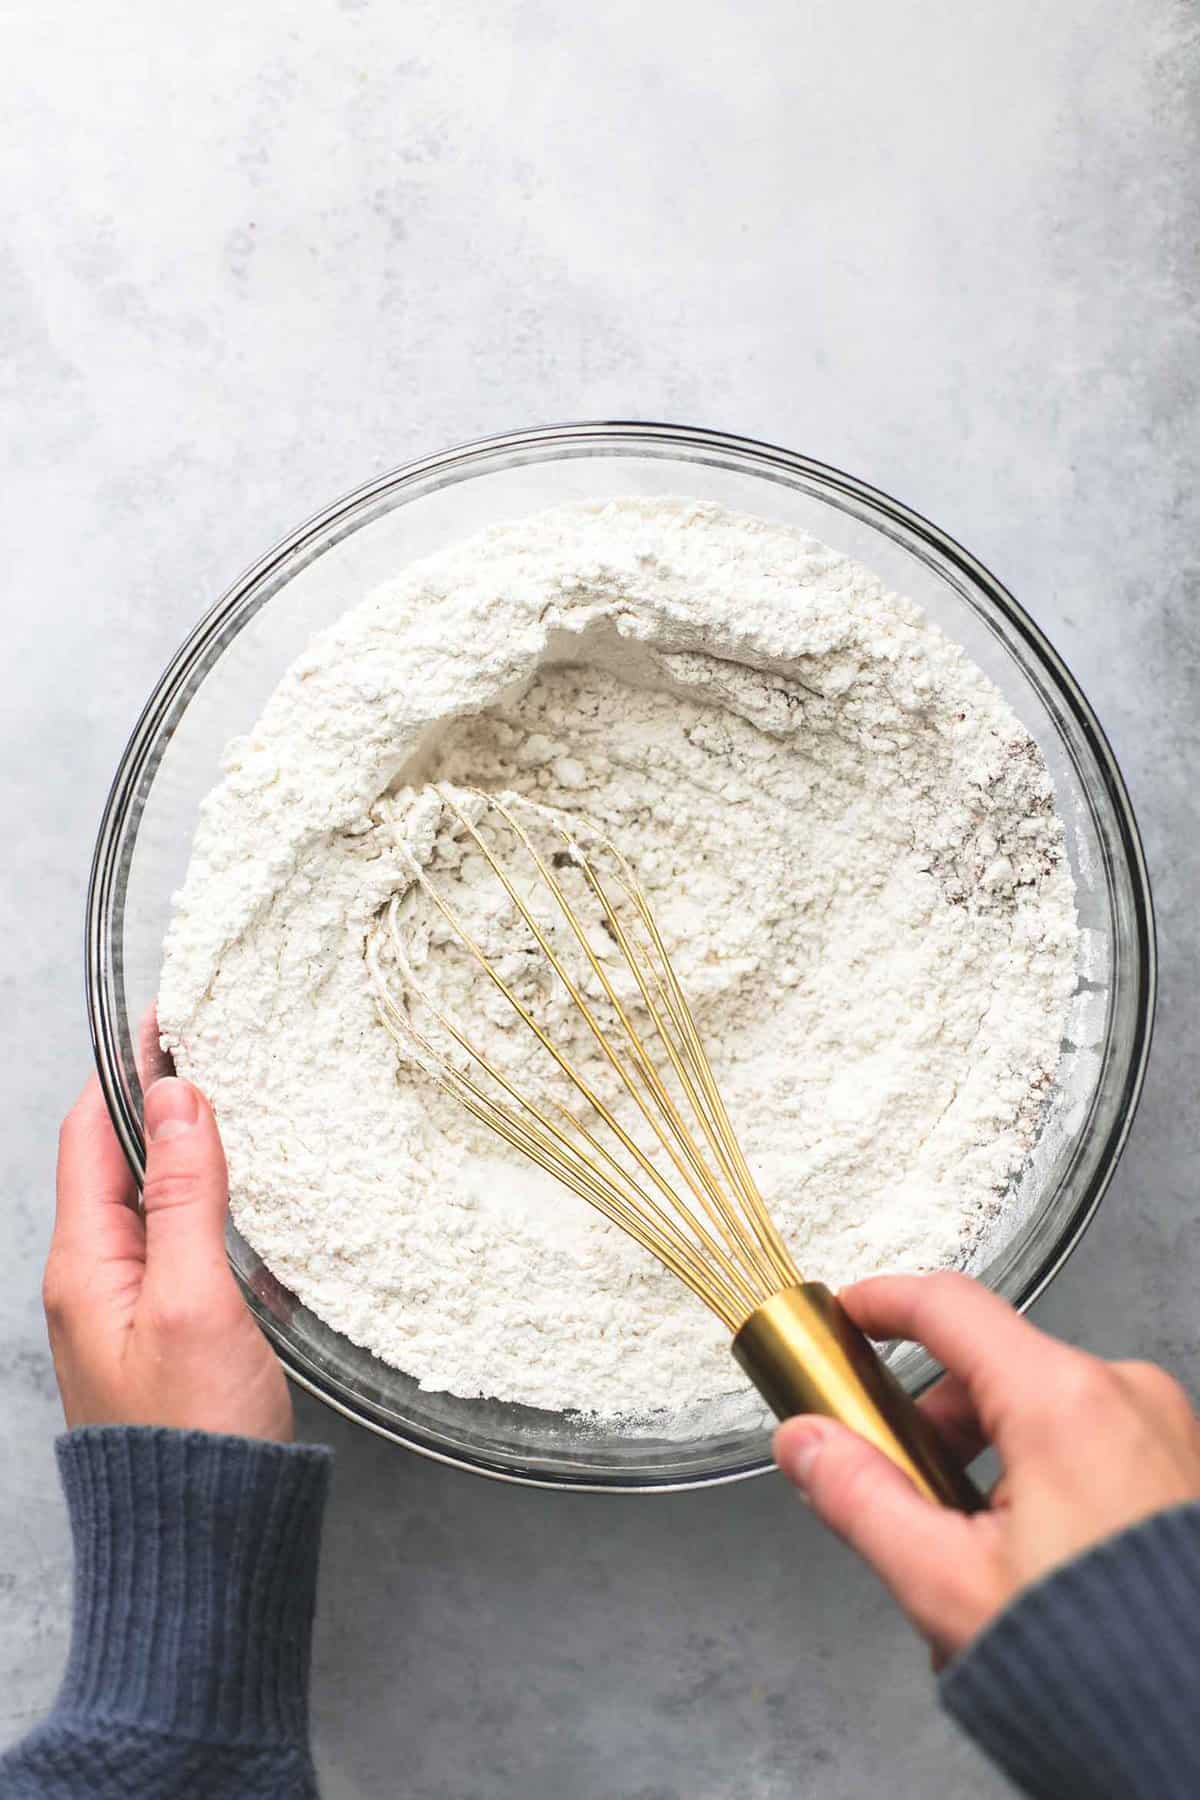 top view of hands holding a glass bowl of flour mixture with the other hand holding a whisk in the bowl.